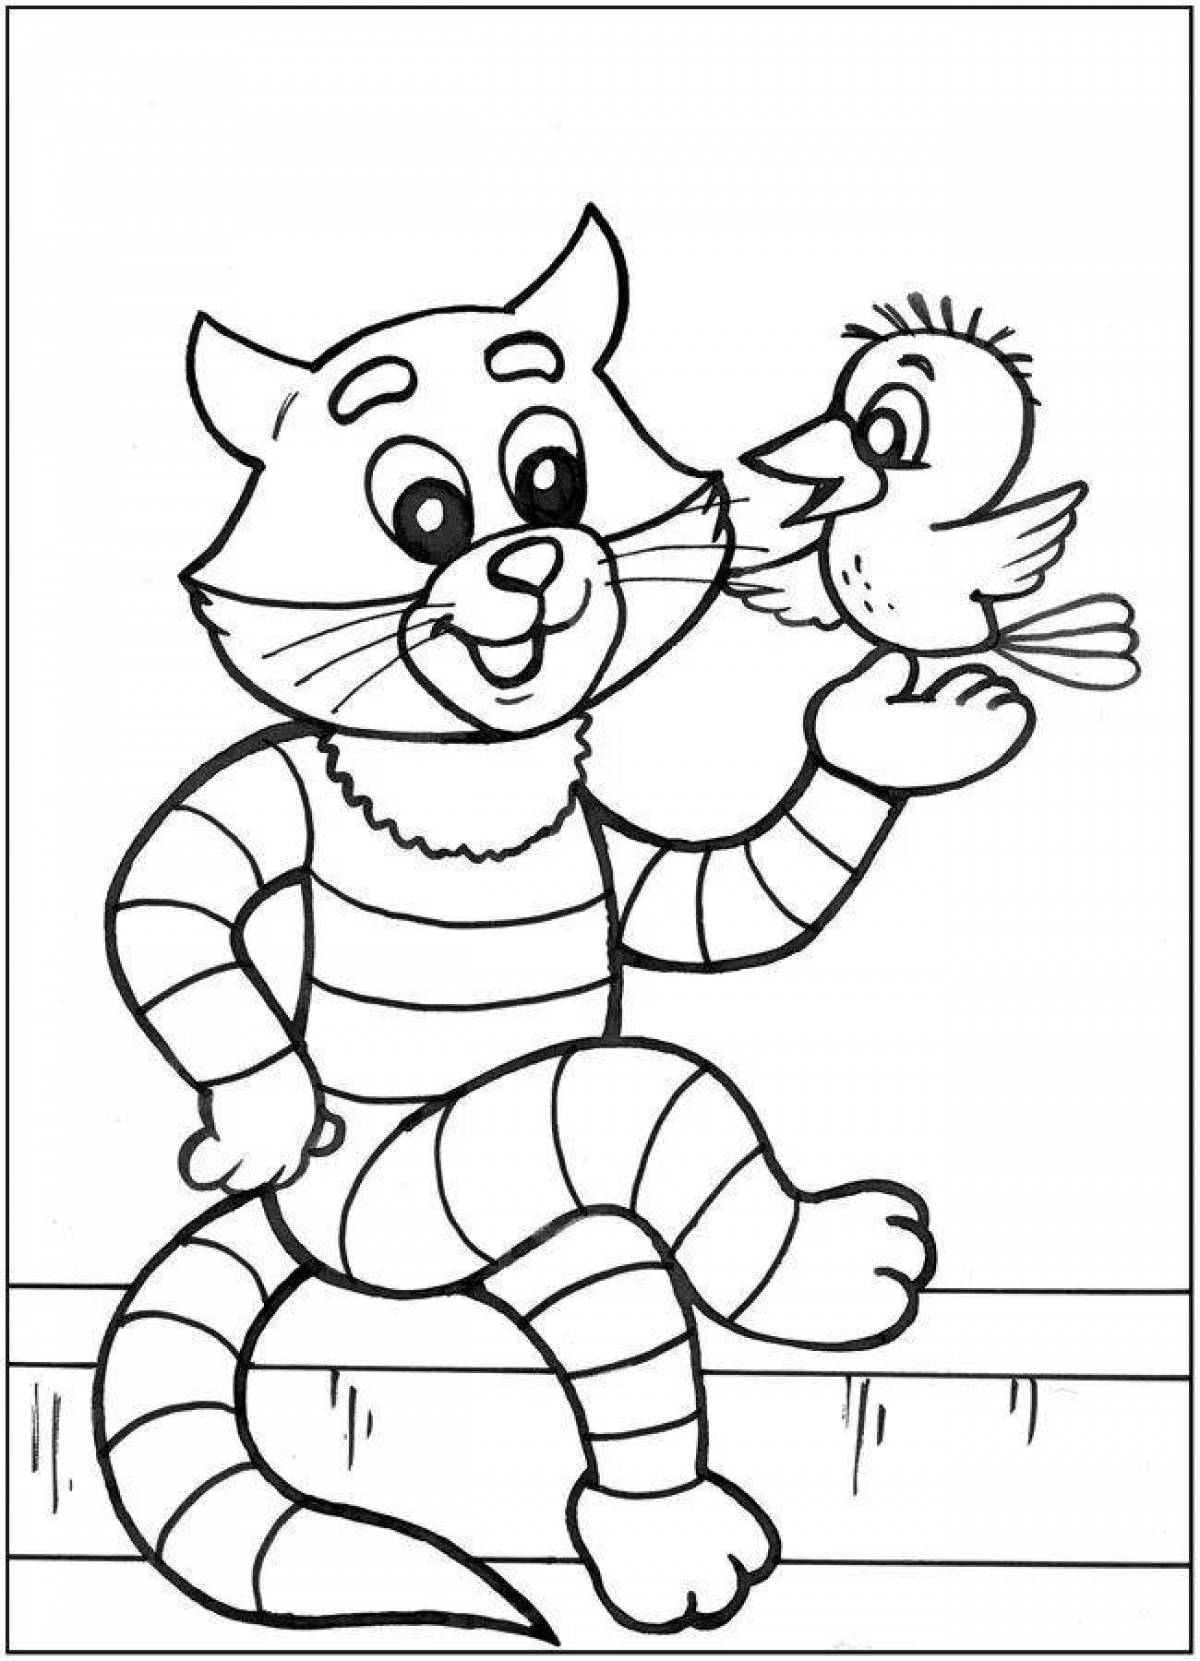 Cute uncle fyodor, dog and cat, coloring book